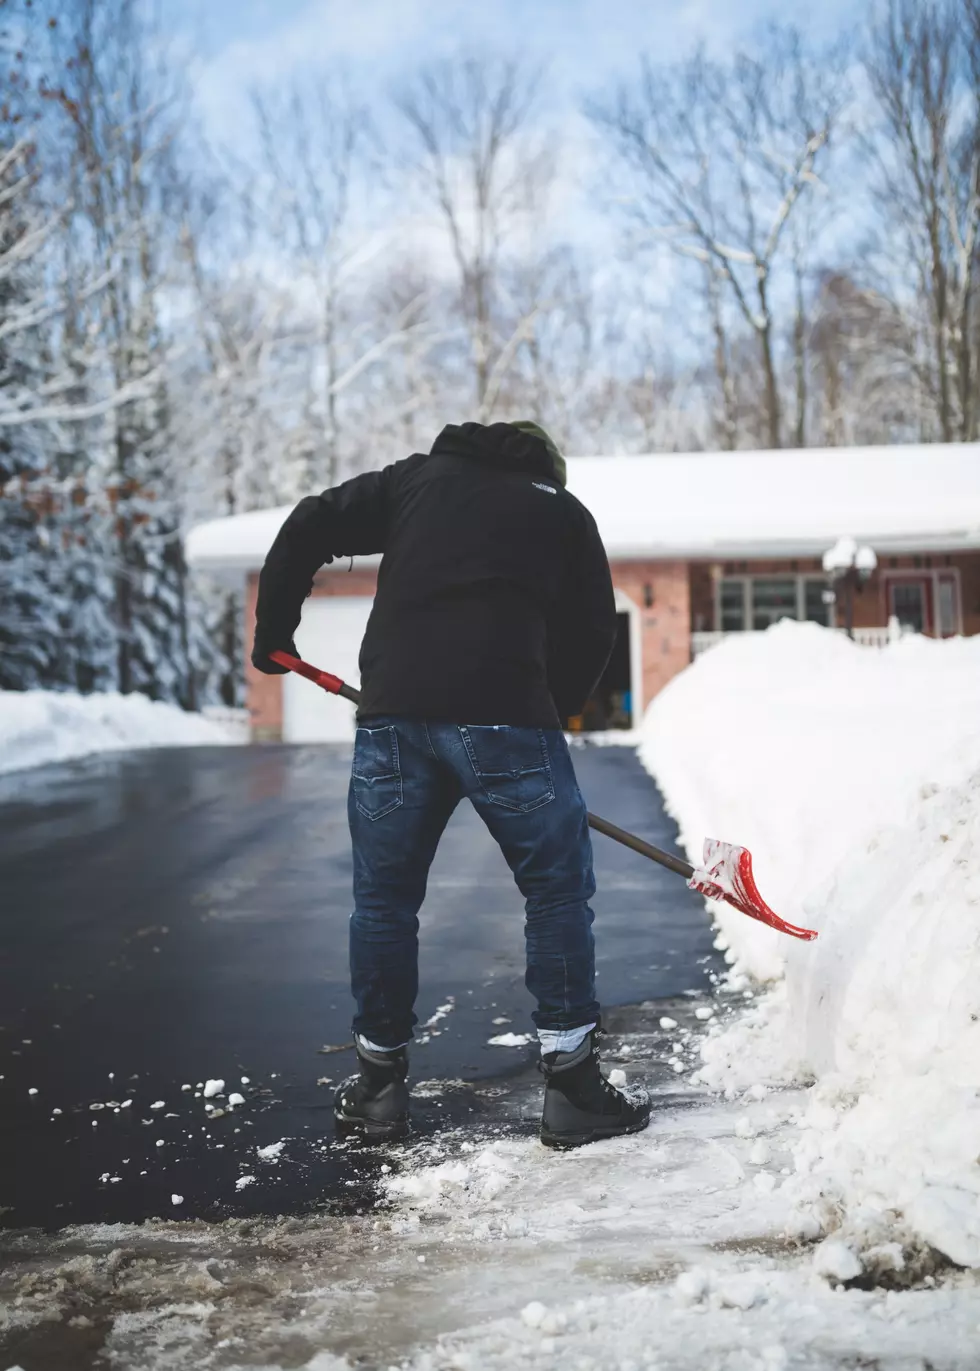 How To Keep The End Of Your Driveway From Being Plowed Shut [Video]